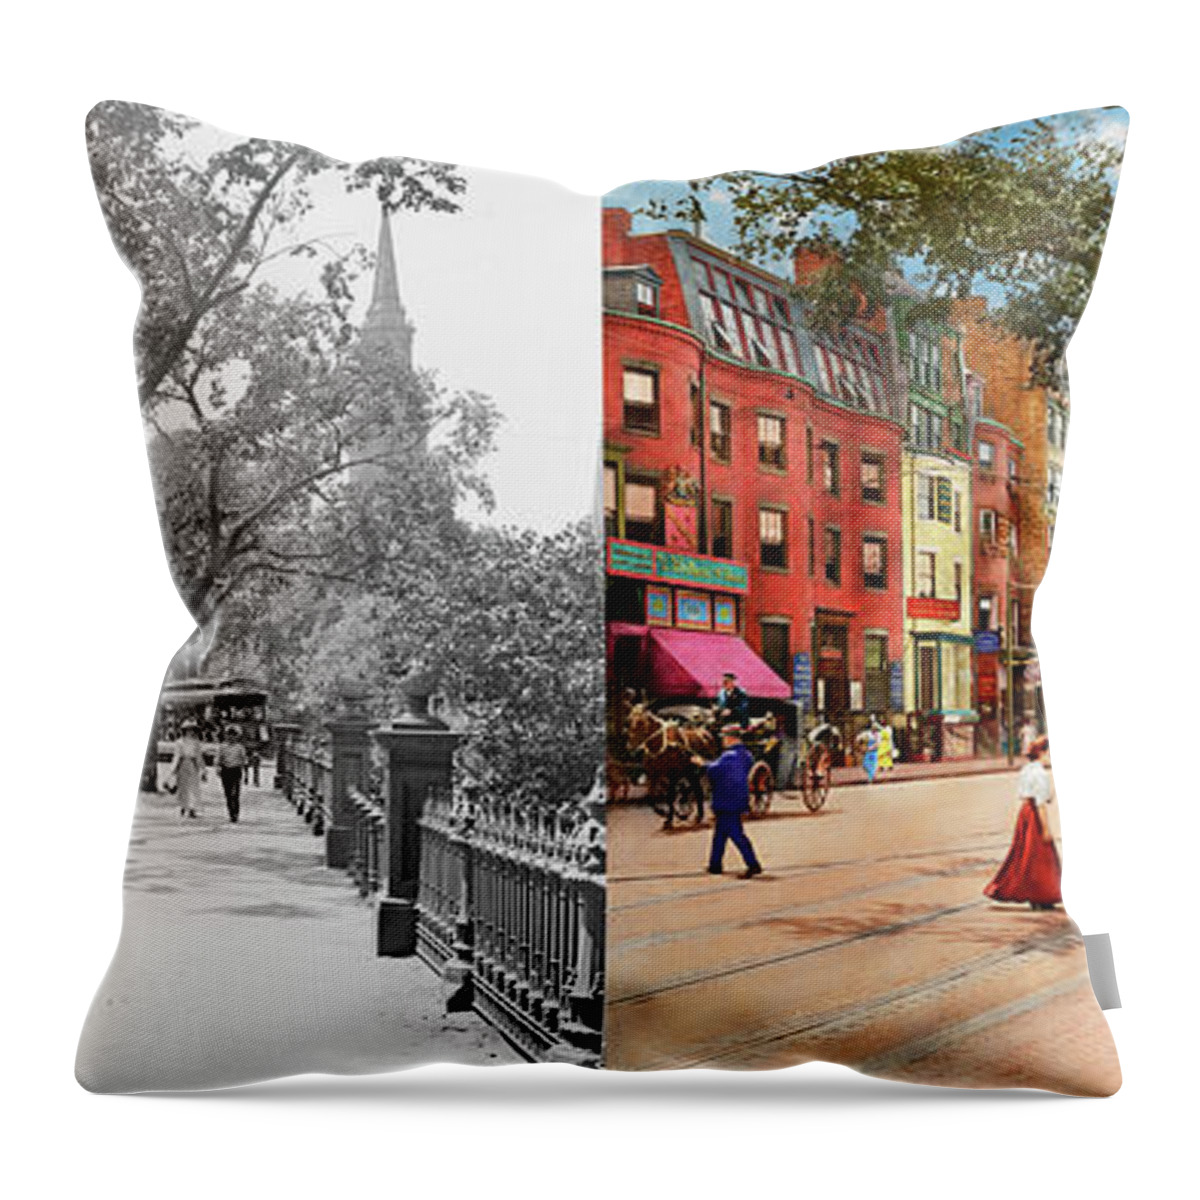 Boston Throw Pillow featuring the photograph City - Boston, MA - Boylston St 1915 - Side by Side by Mike Savad